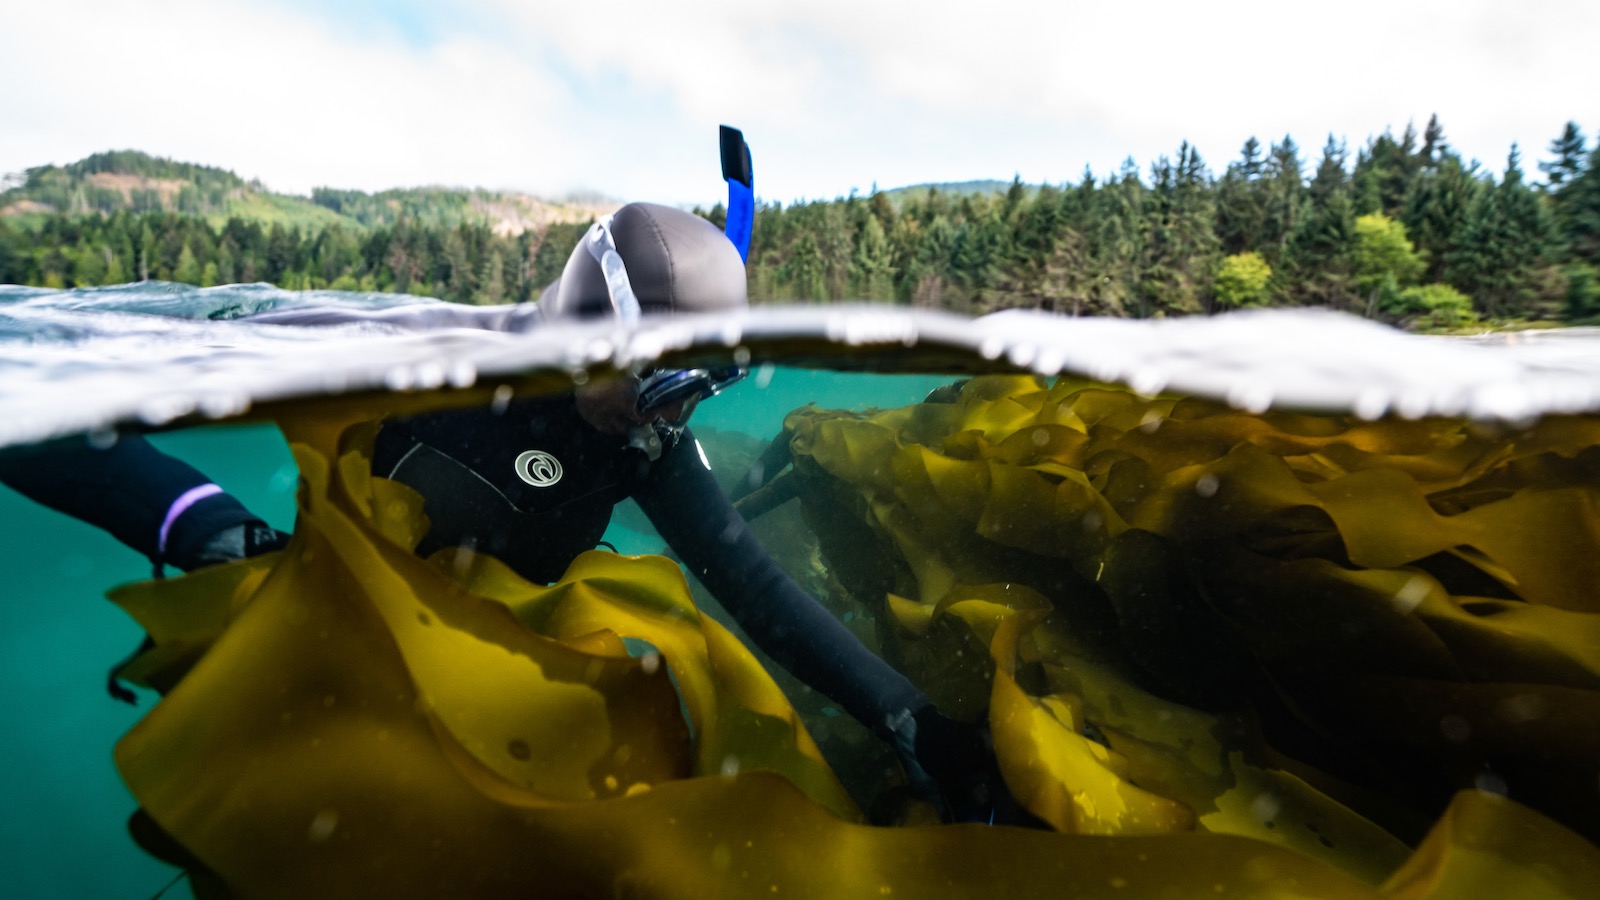 A diver is seen harvesting bull kelp just below the surface of the sea of the coast of Vancouver Island.